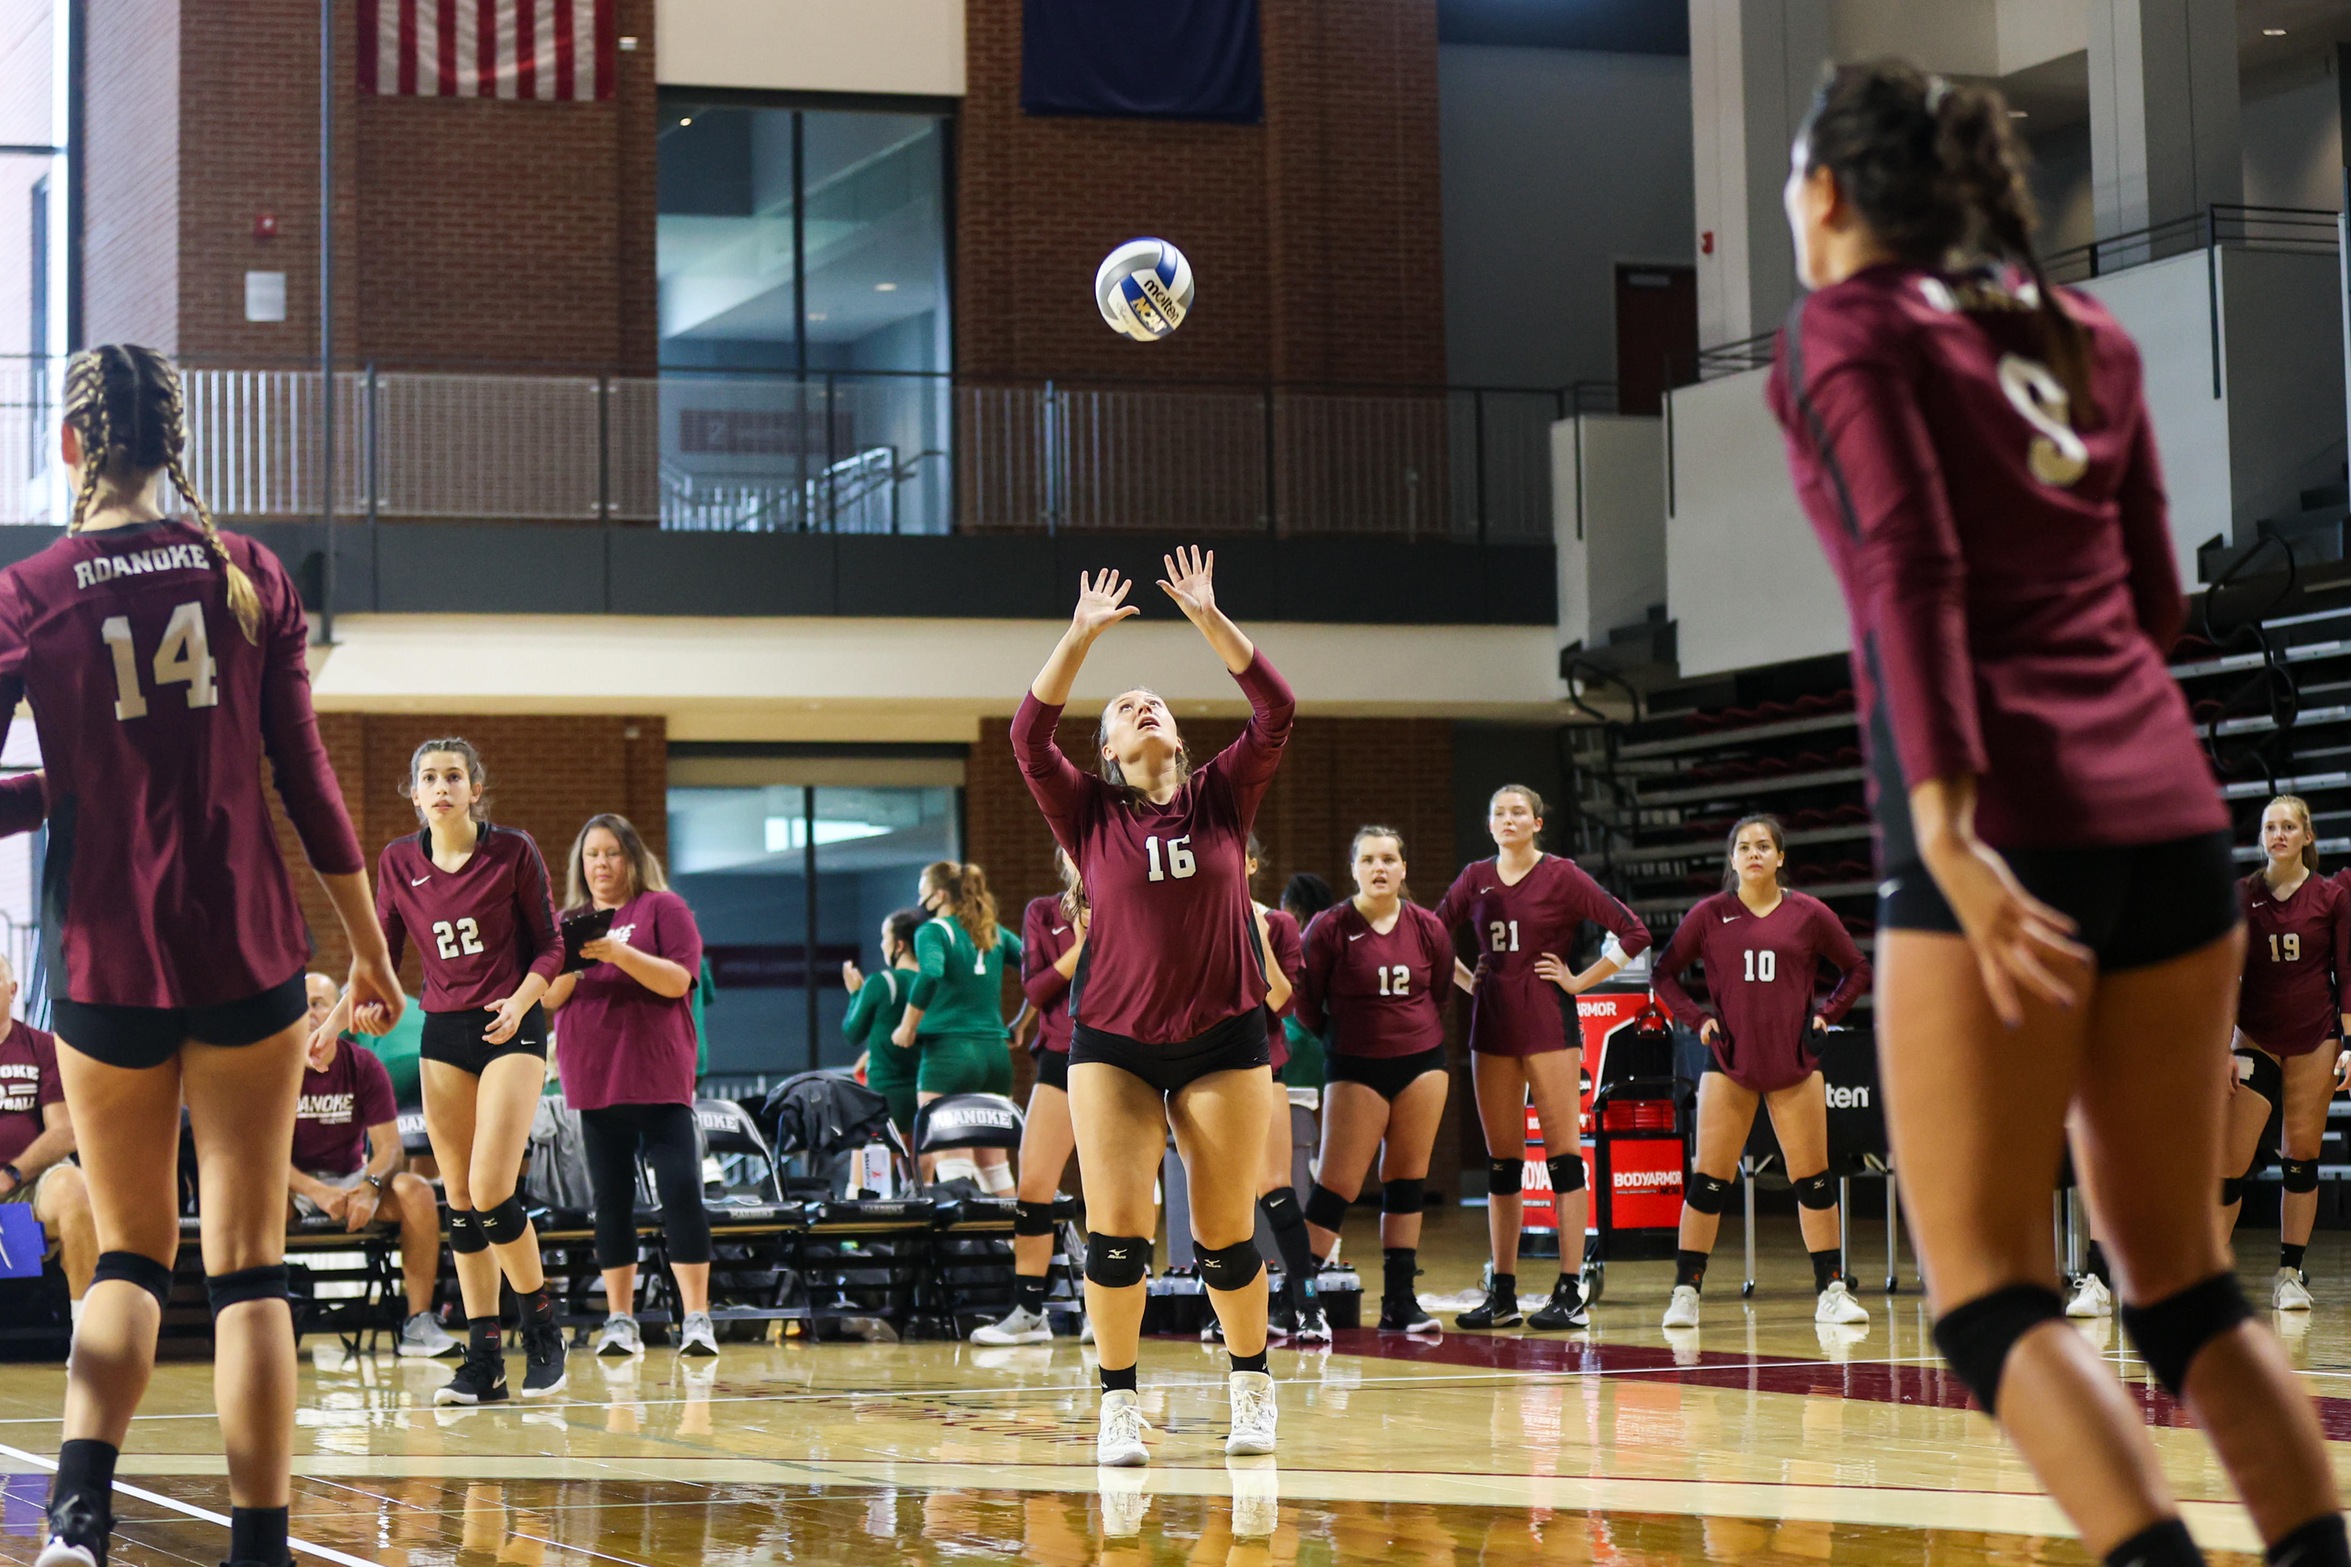 Roanoke fell to BC, 3-1